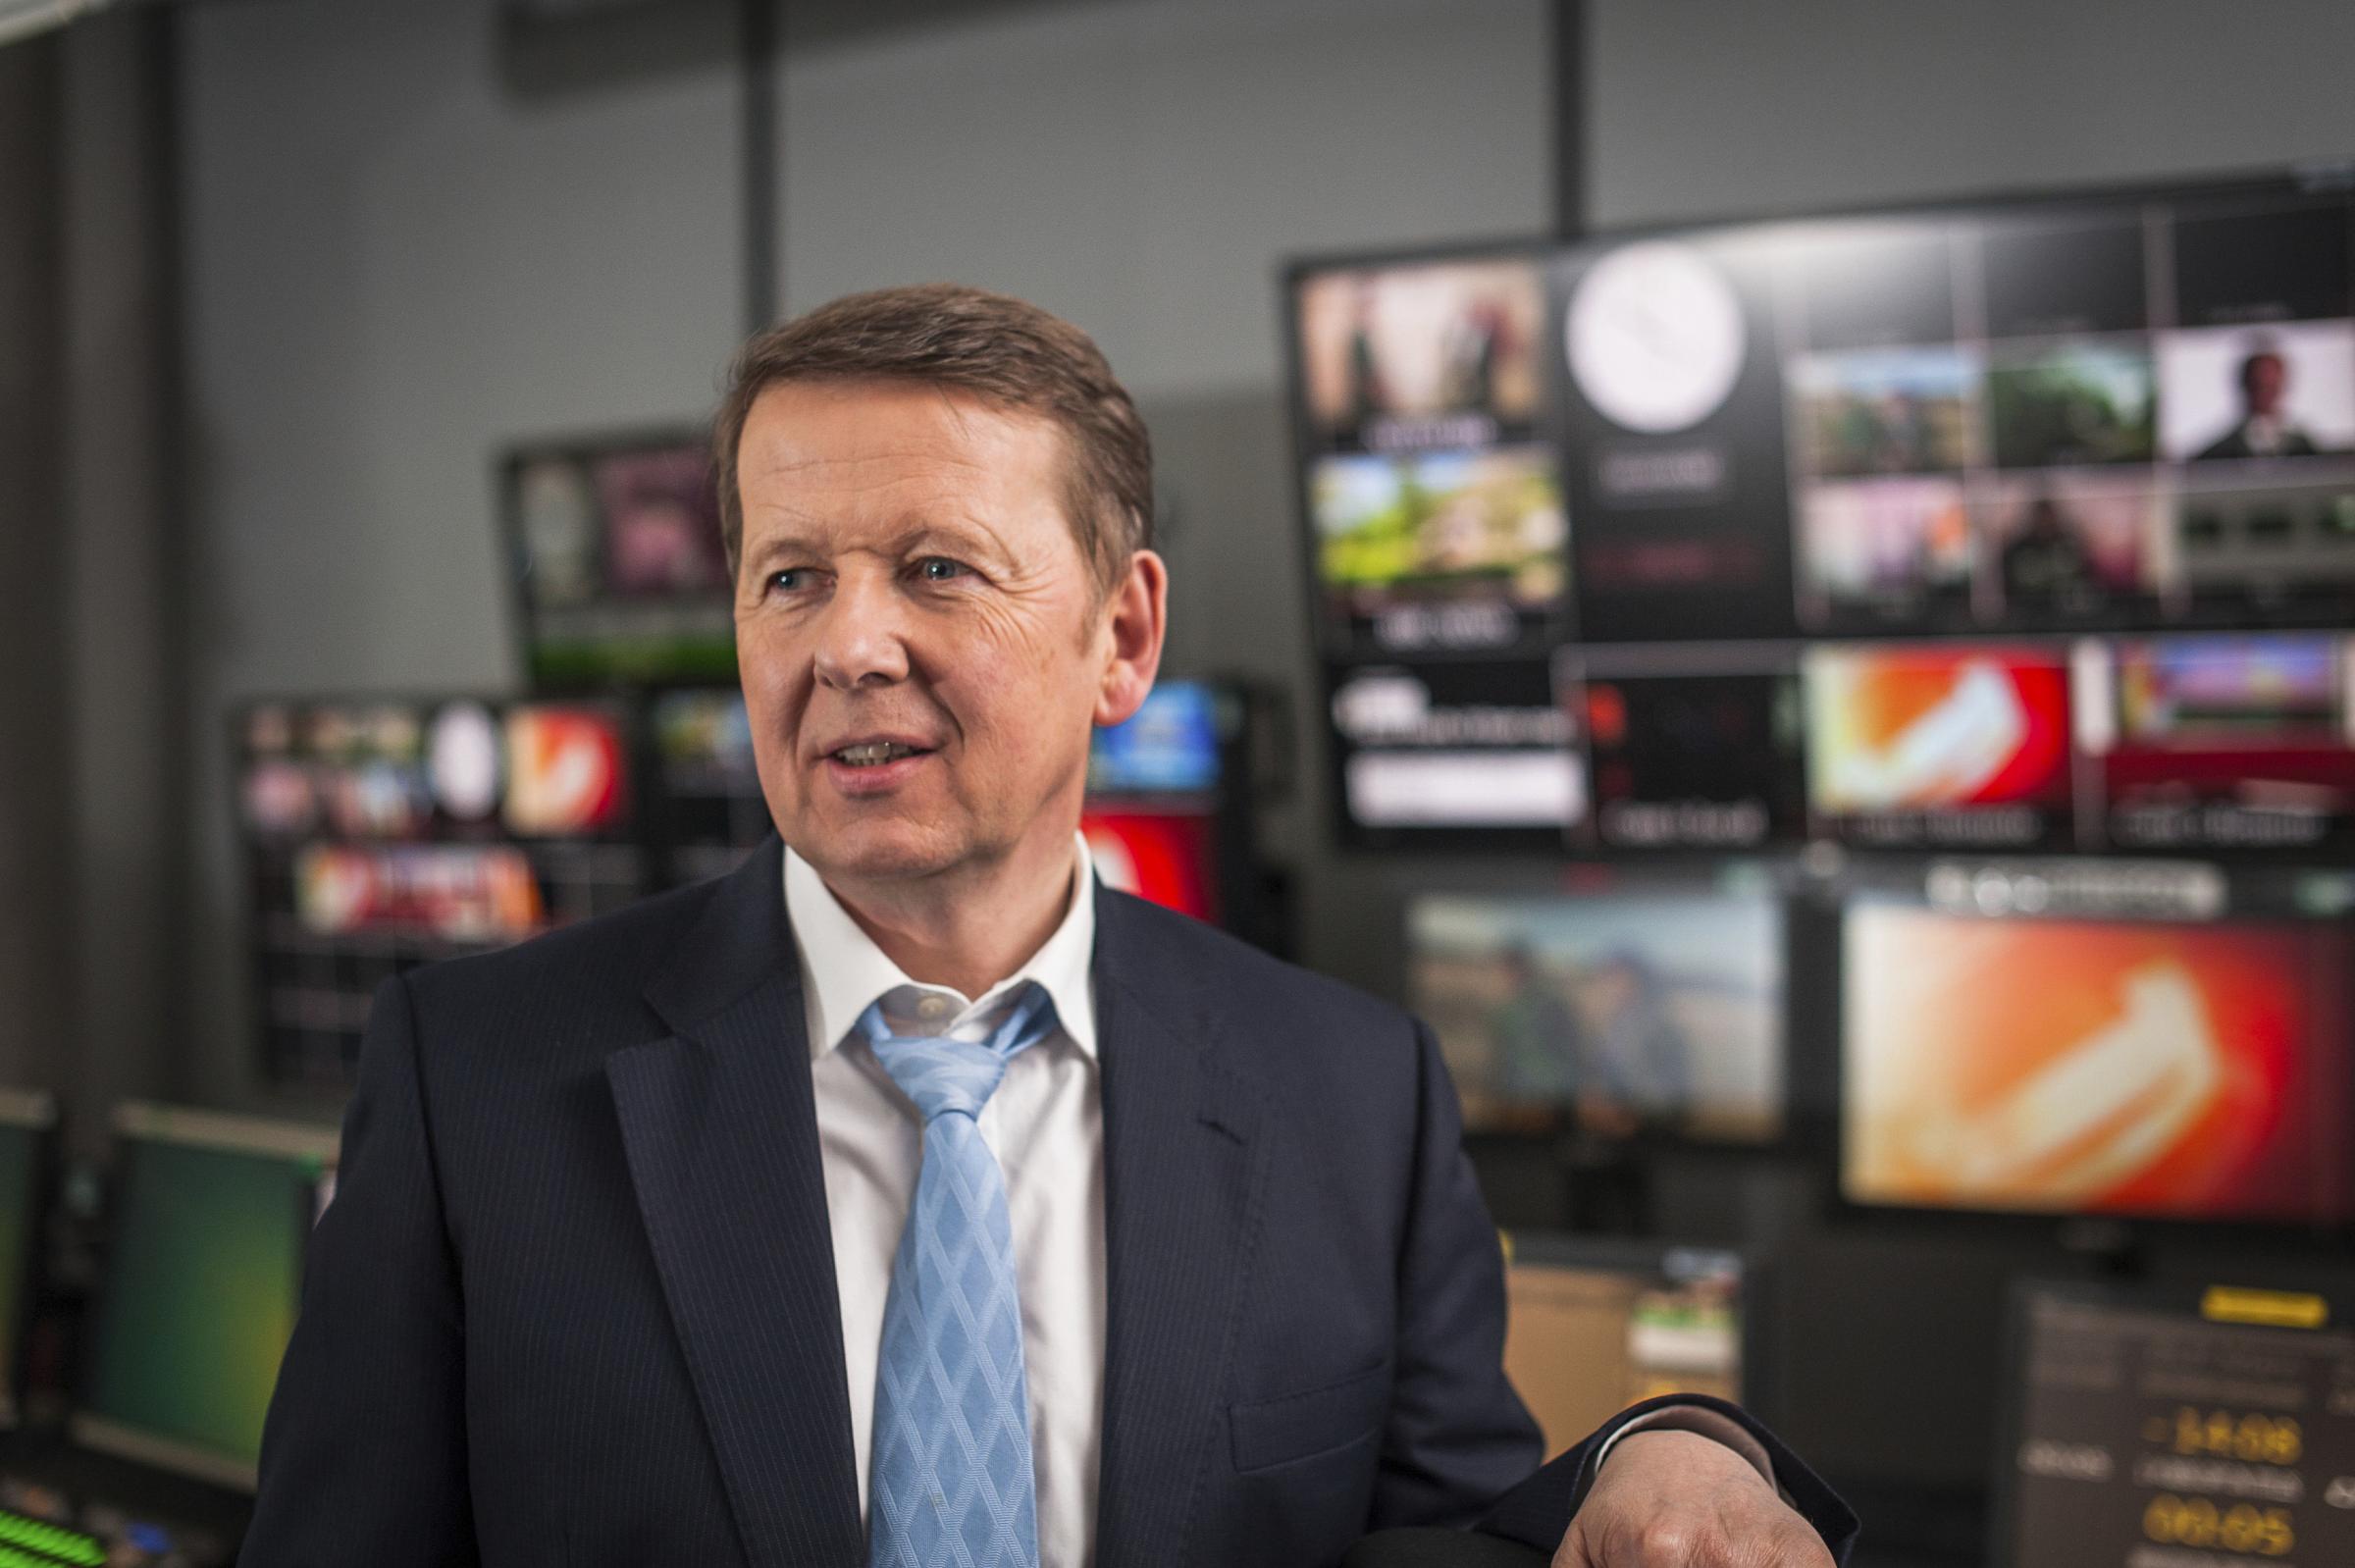 Was yesterday’s celebration of Bill Turnbull on BBC1’s Breakfast over the top?